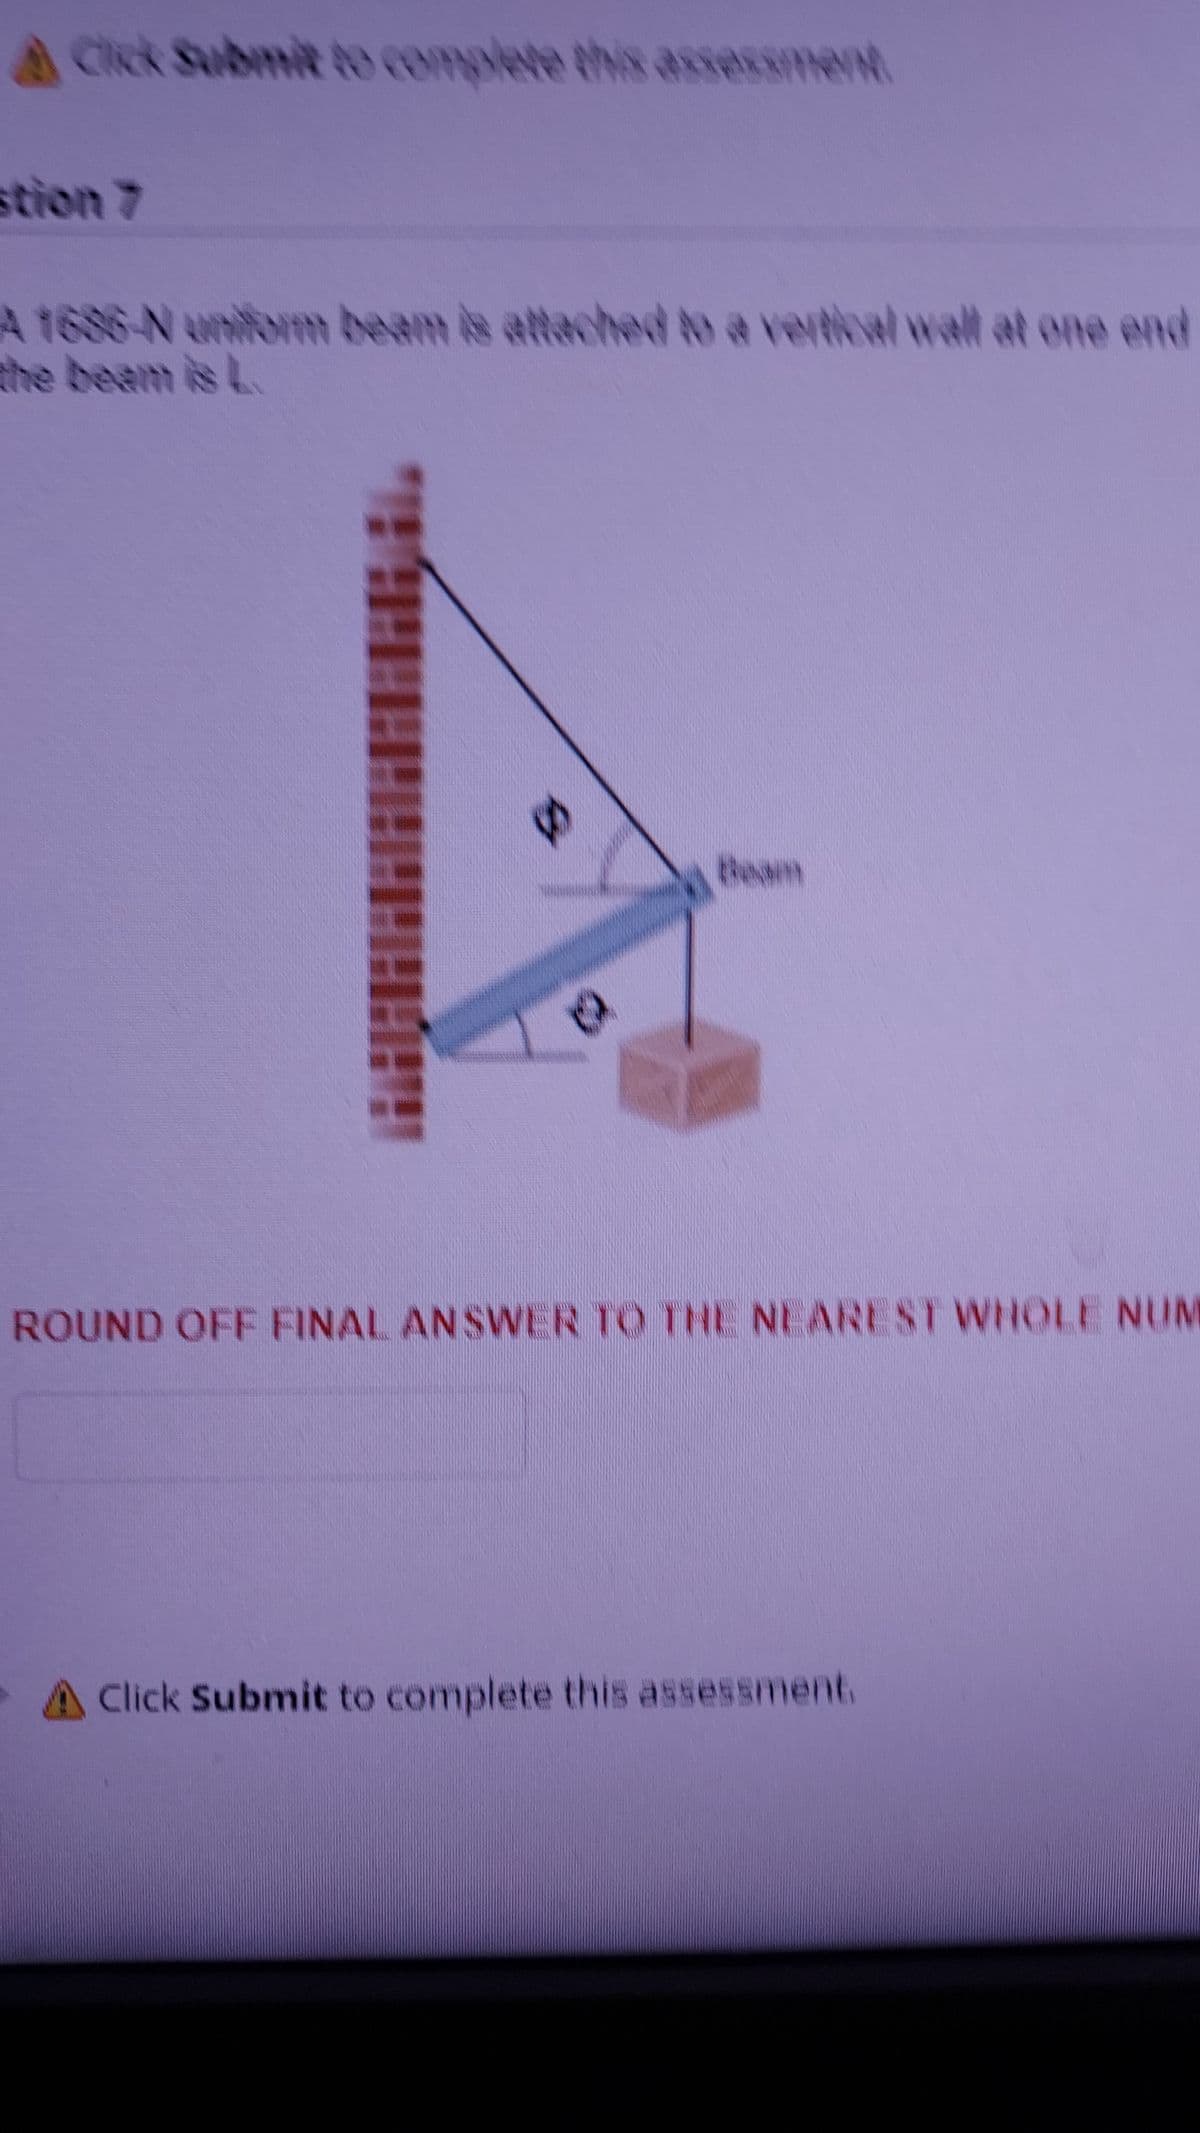 A Click Submit to complete this assessme
A 1686-N uniform beam is attached to a vertical wall at one end
the beam is L
Bessen
ROUND OFF FINAL ANSWER TO THE NEAREST WHOLE NUM
A Click Submit to complete this assessment.
HARAL
S
C